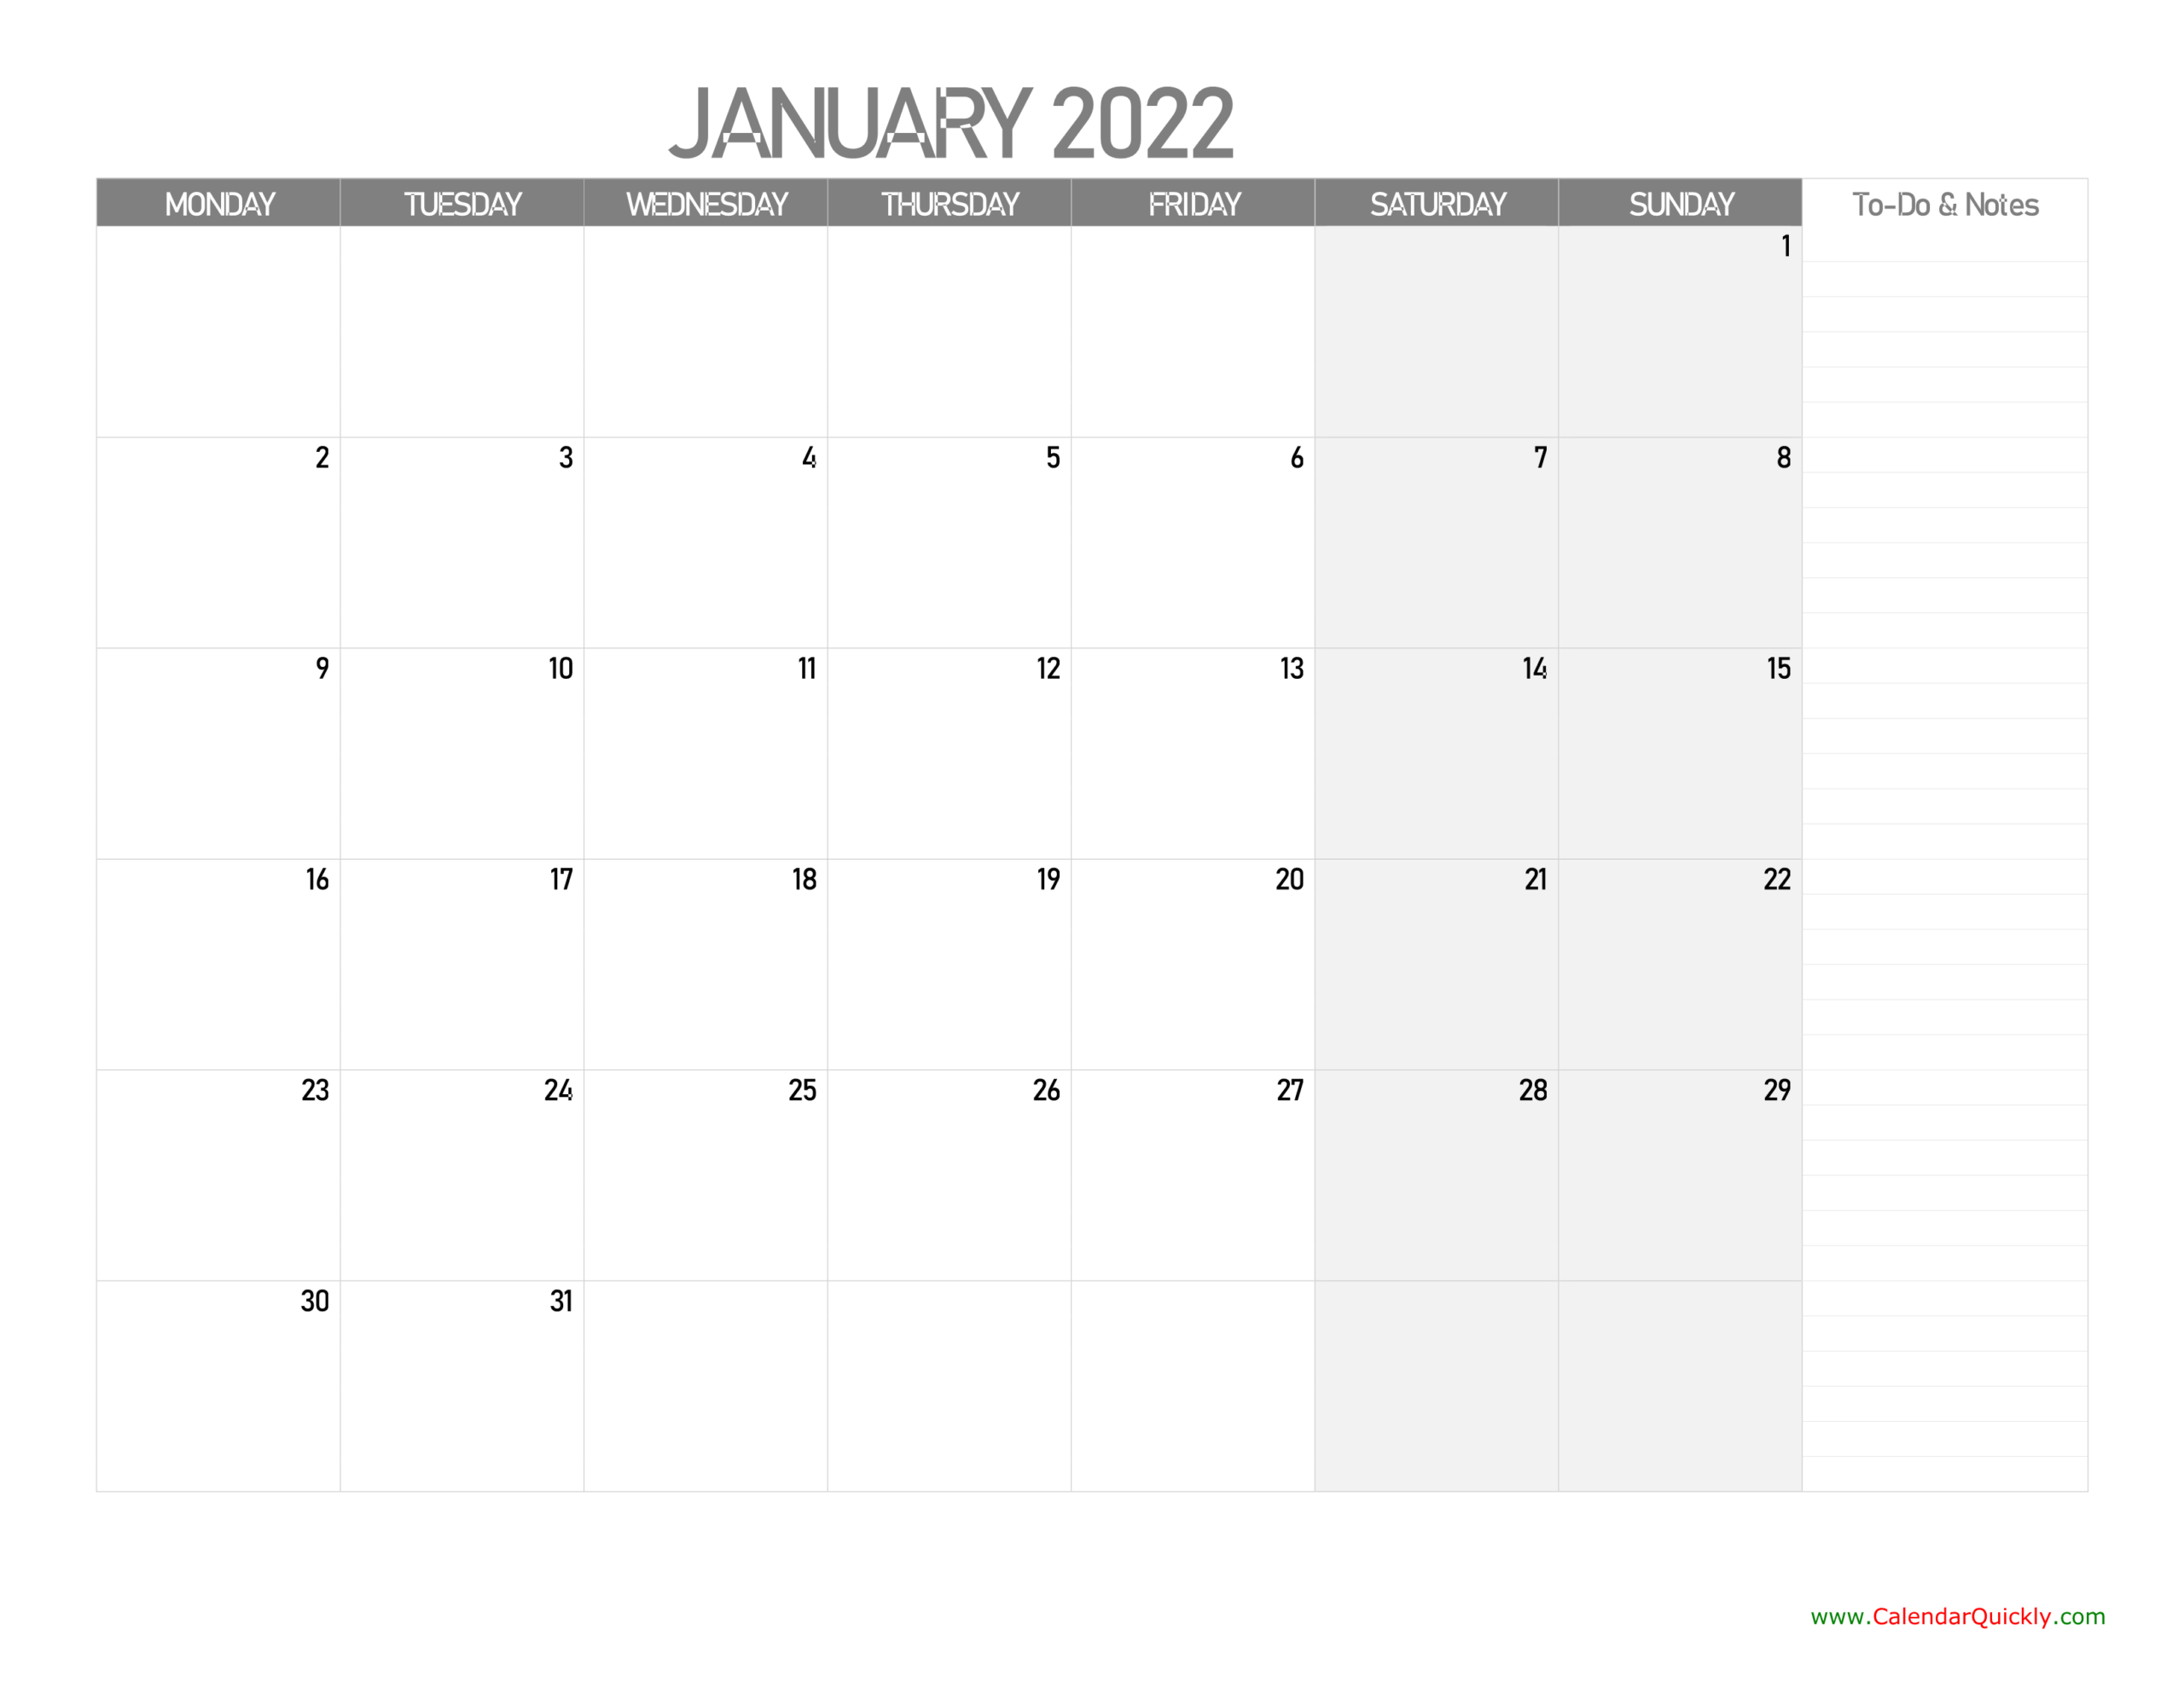 monthly monday calendar 2022 with notes | calendar quickly